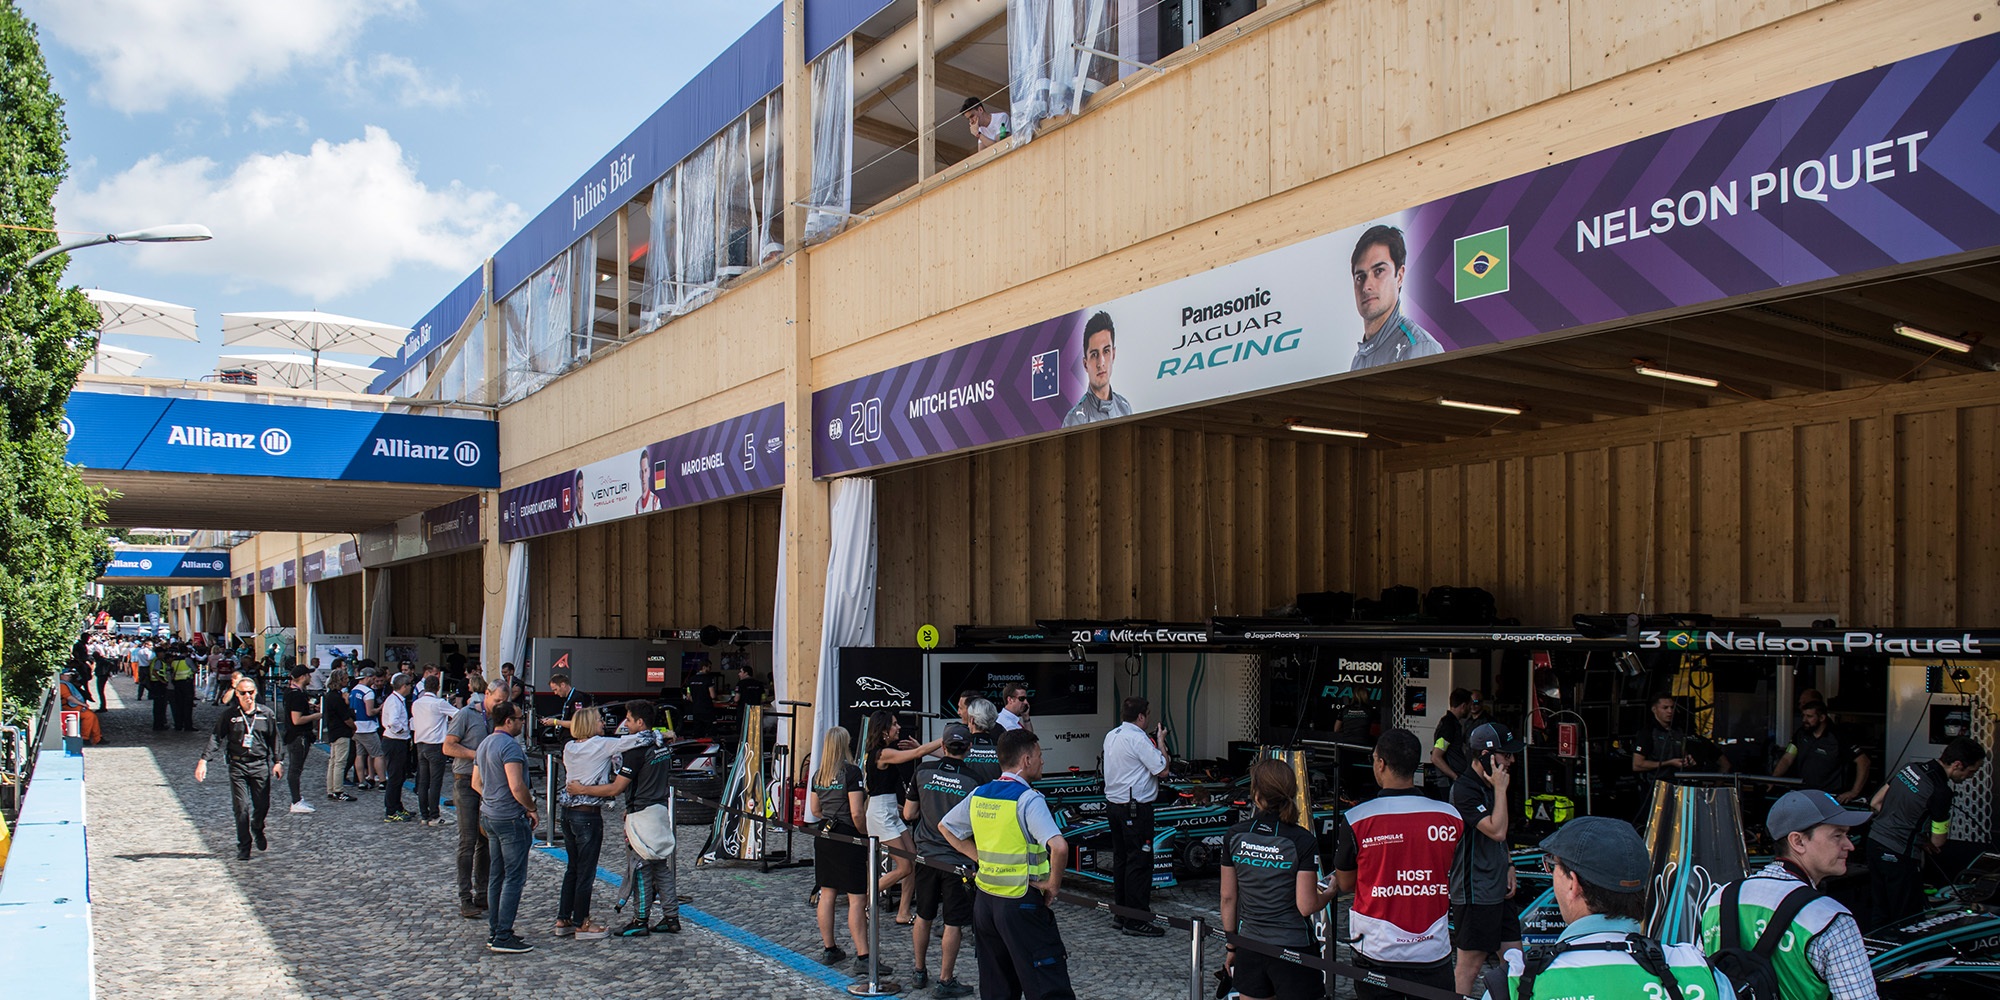 The timber event construction served as a pit lane for the 2018 Zurich E-Prix. Visitors and team members can be seen in the foreground. In the background, the racing cars are in the pits.